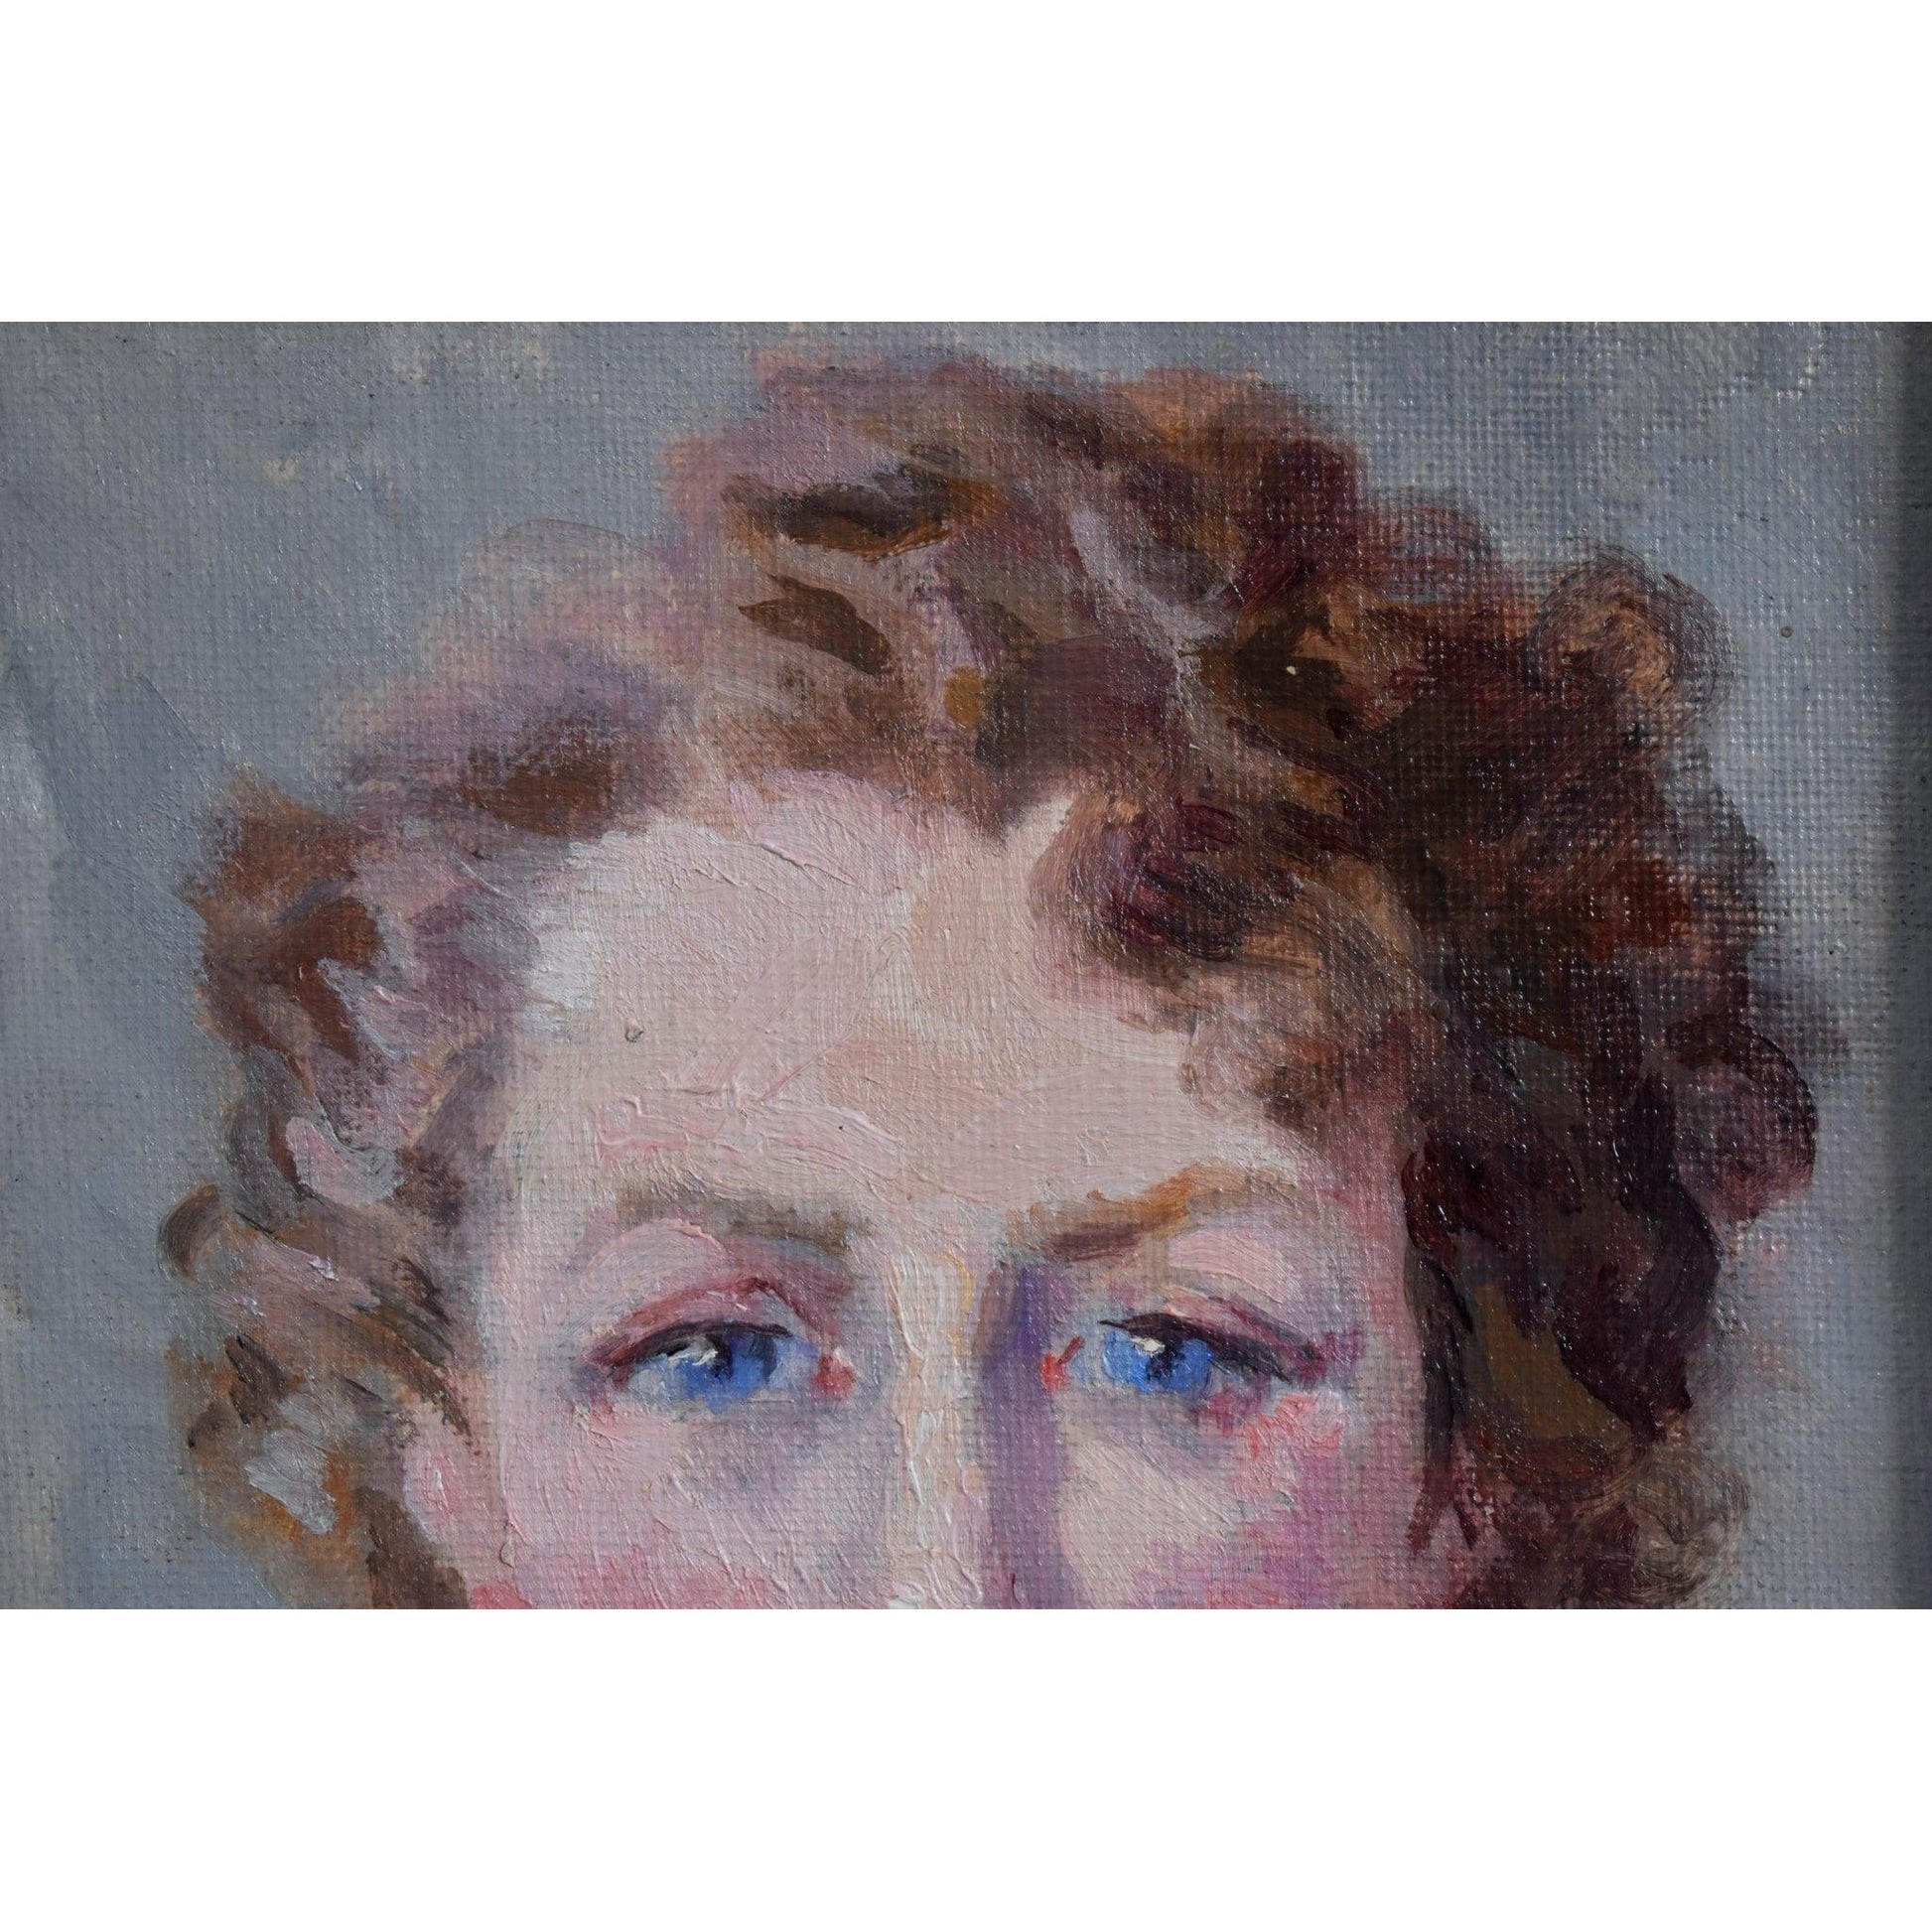 Vintage oil painting portrait, woman with blue eyes, circa 1940, by Odette Durand, for sale at Winckelmann Gallery.